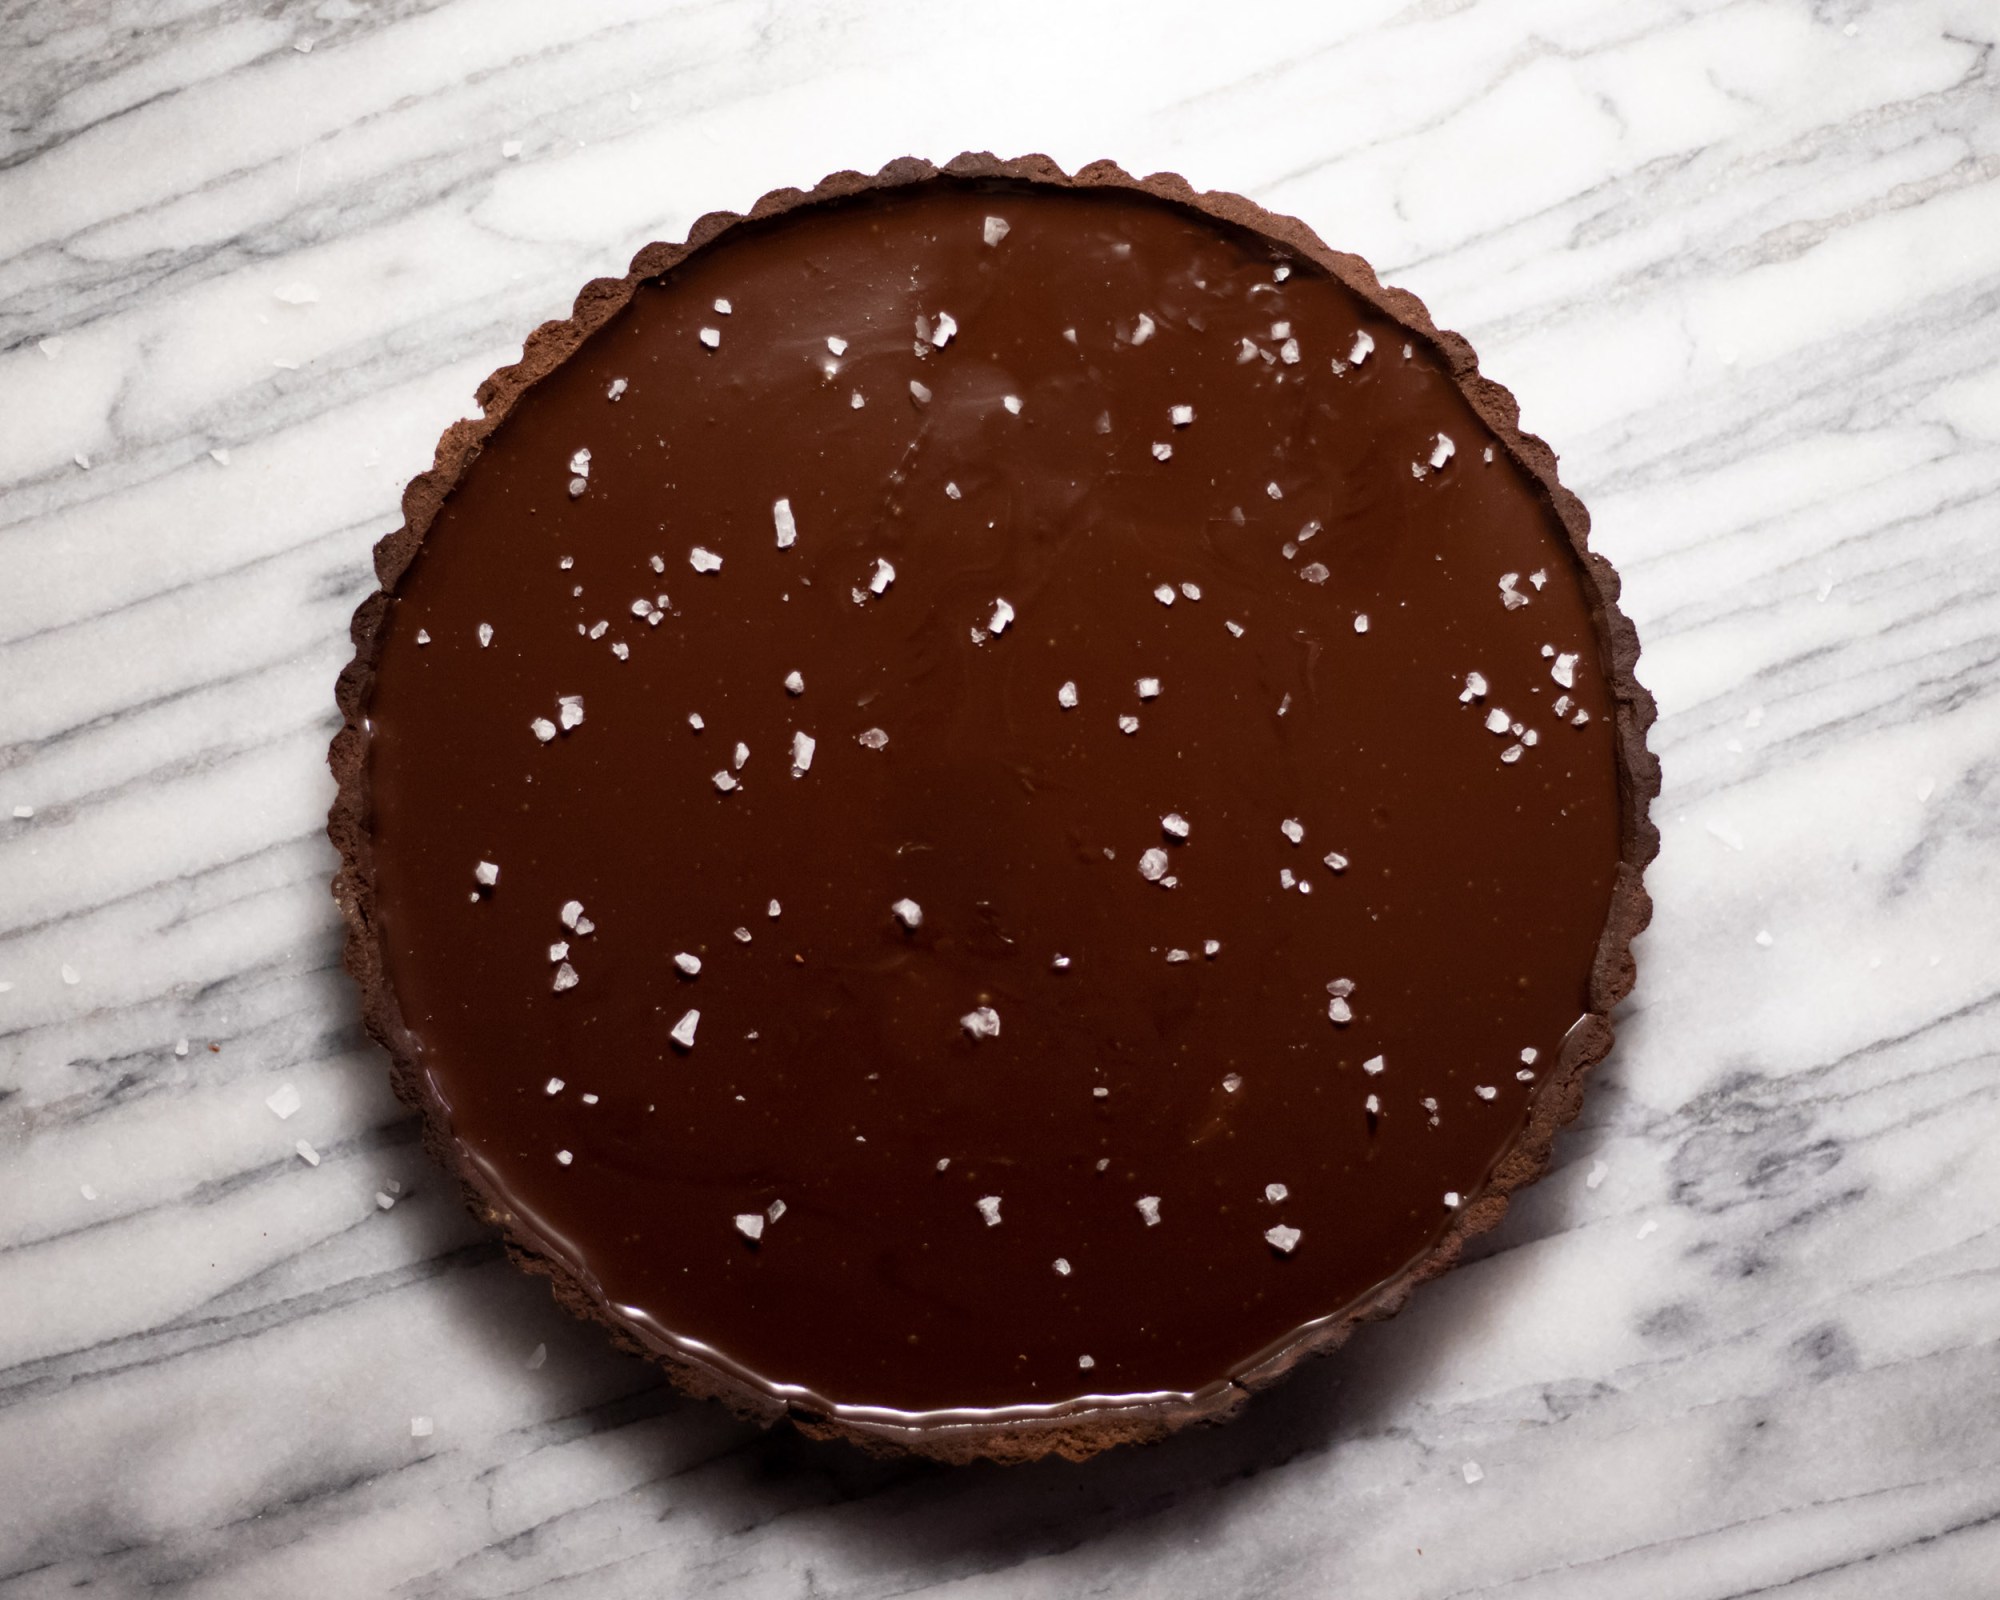 A Warm Mocha Tart is a tasty chocolate treat to enjoy on Easter. (Photo by Getty Images)